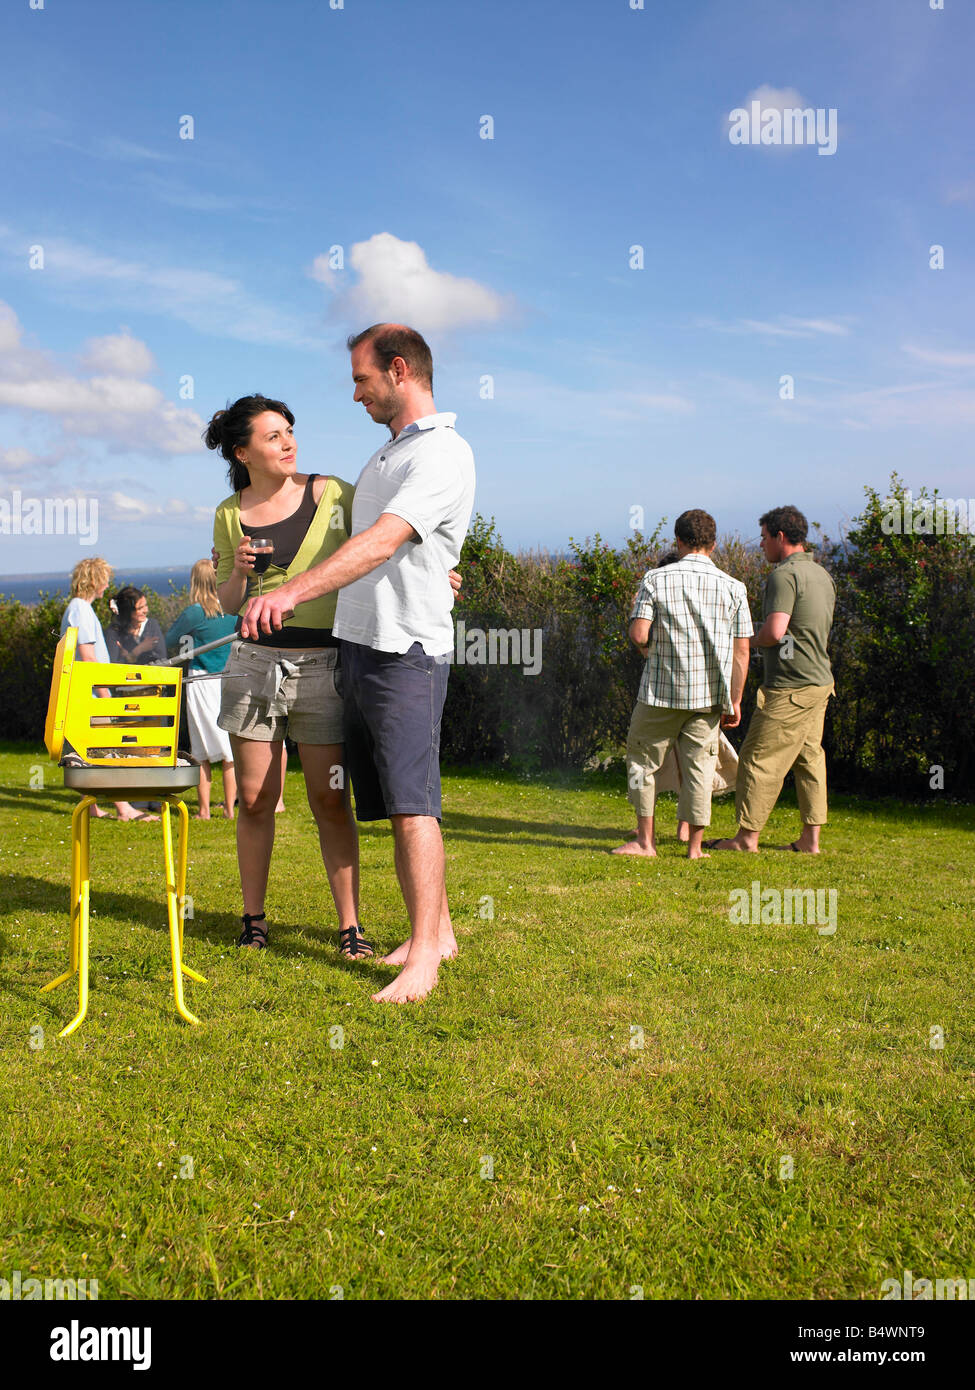 Man tending barbecue with woman Stock Photo